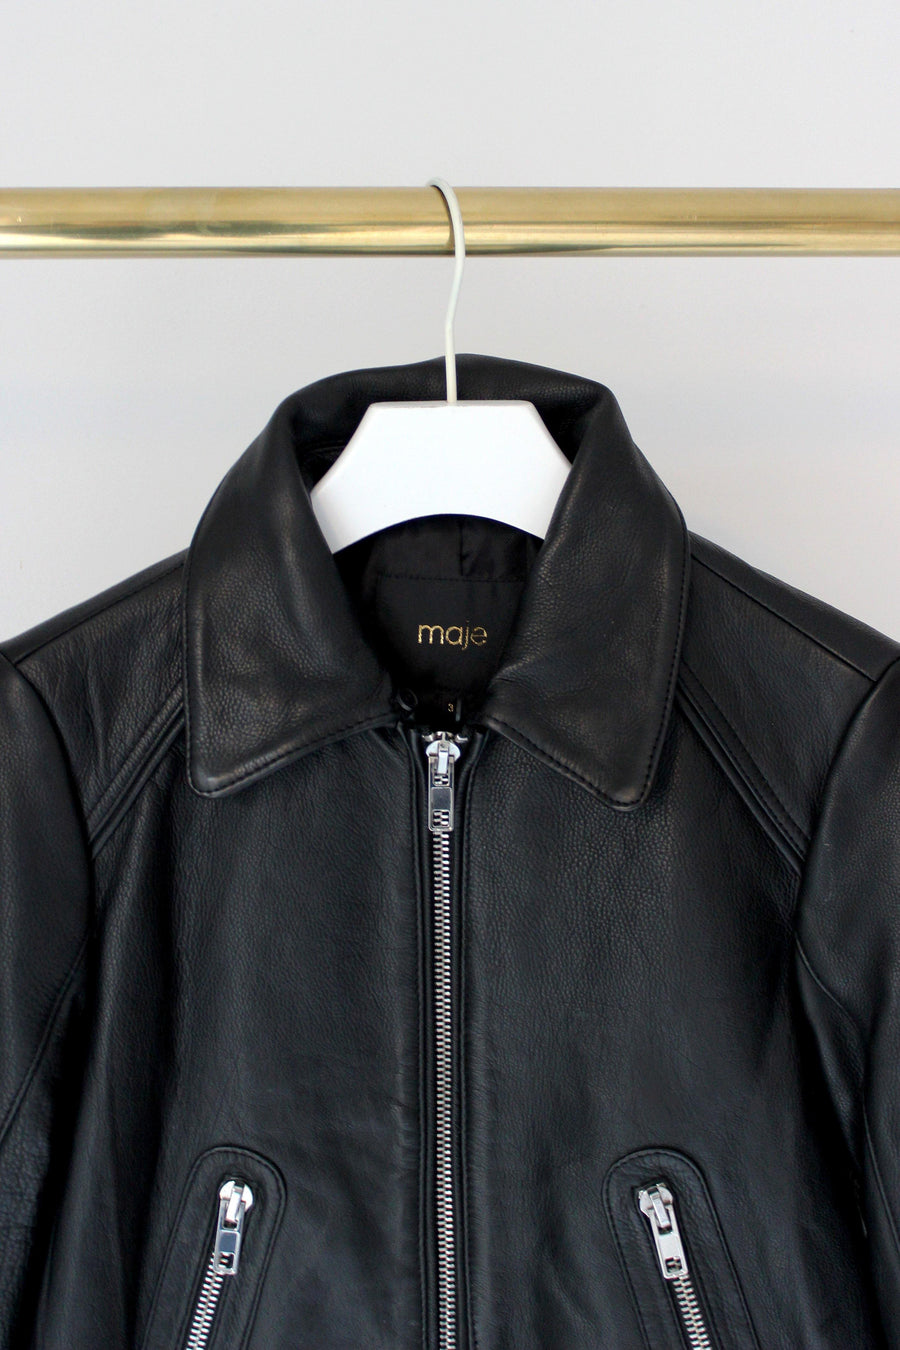 MAJE Leather Jacket - The Good Store Berlin